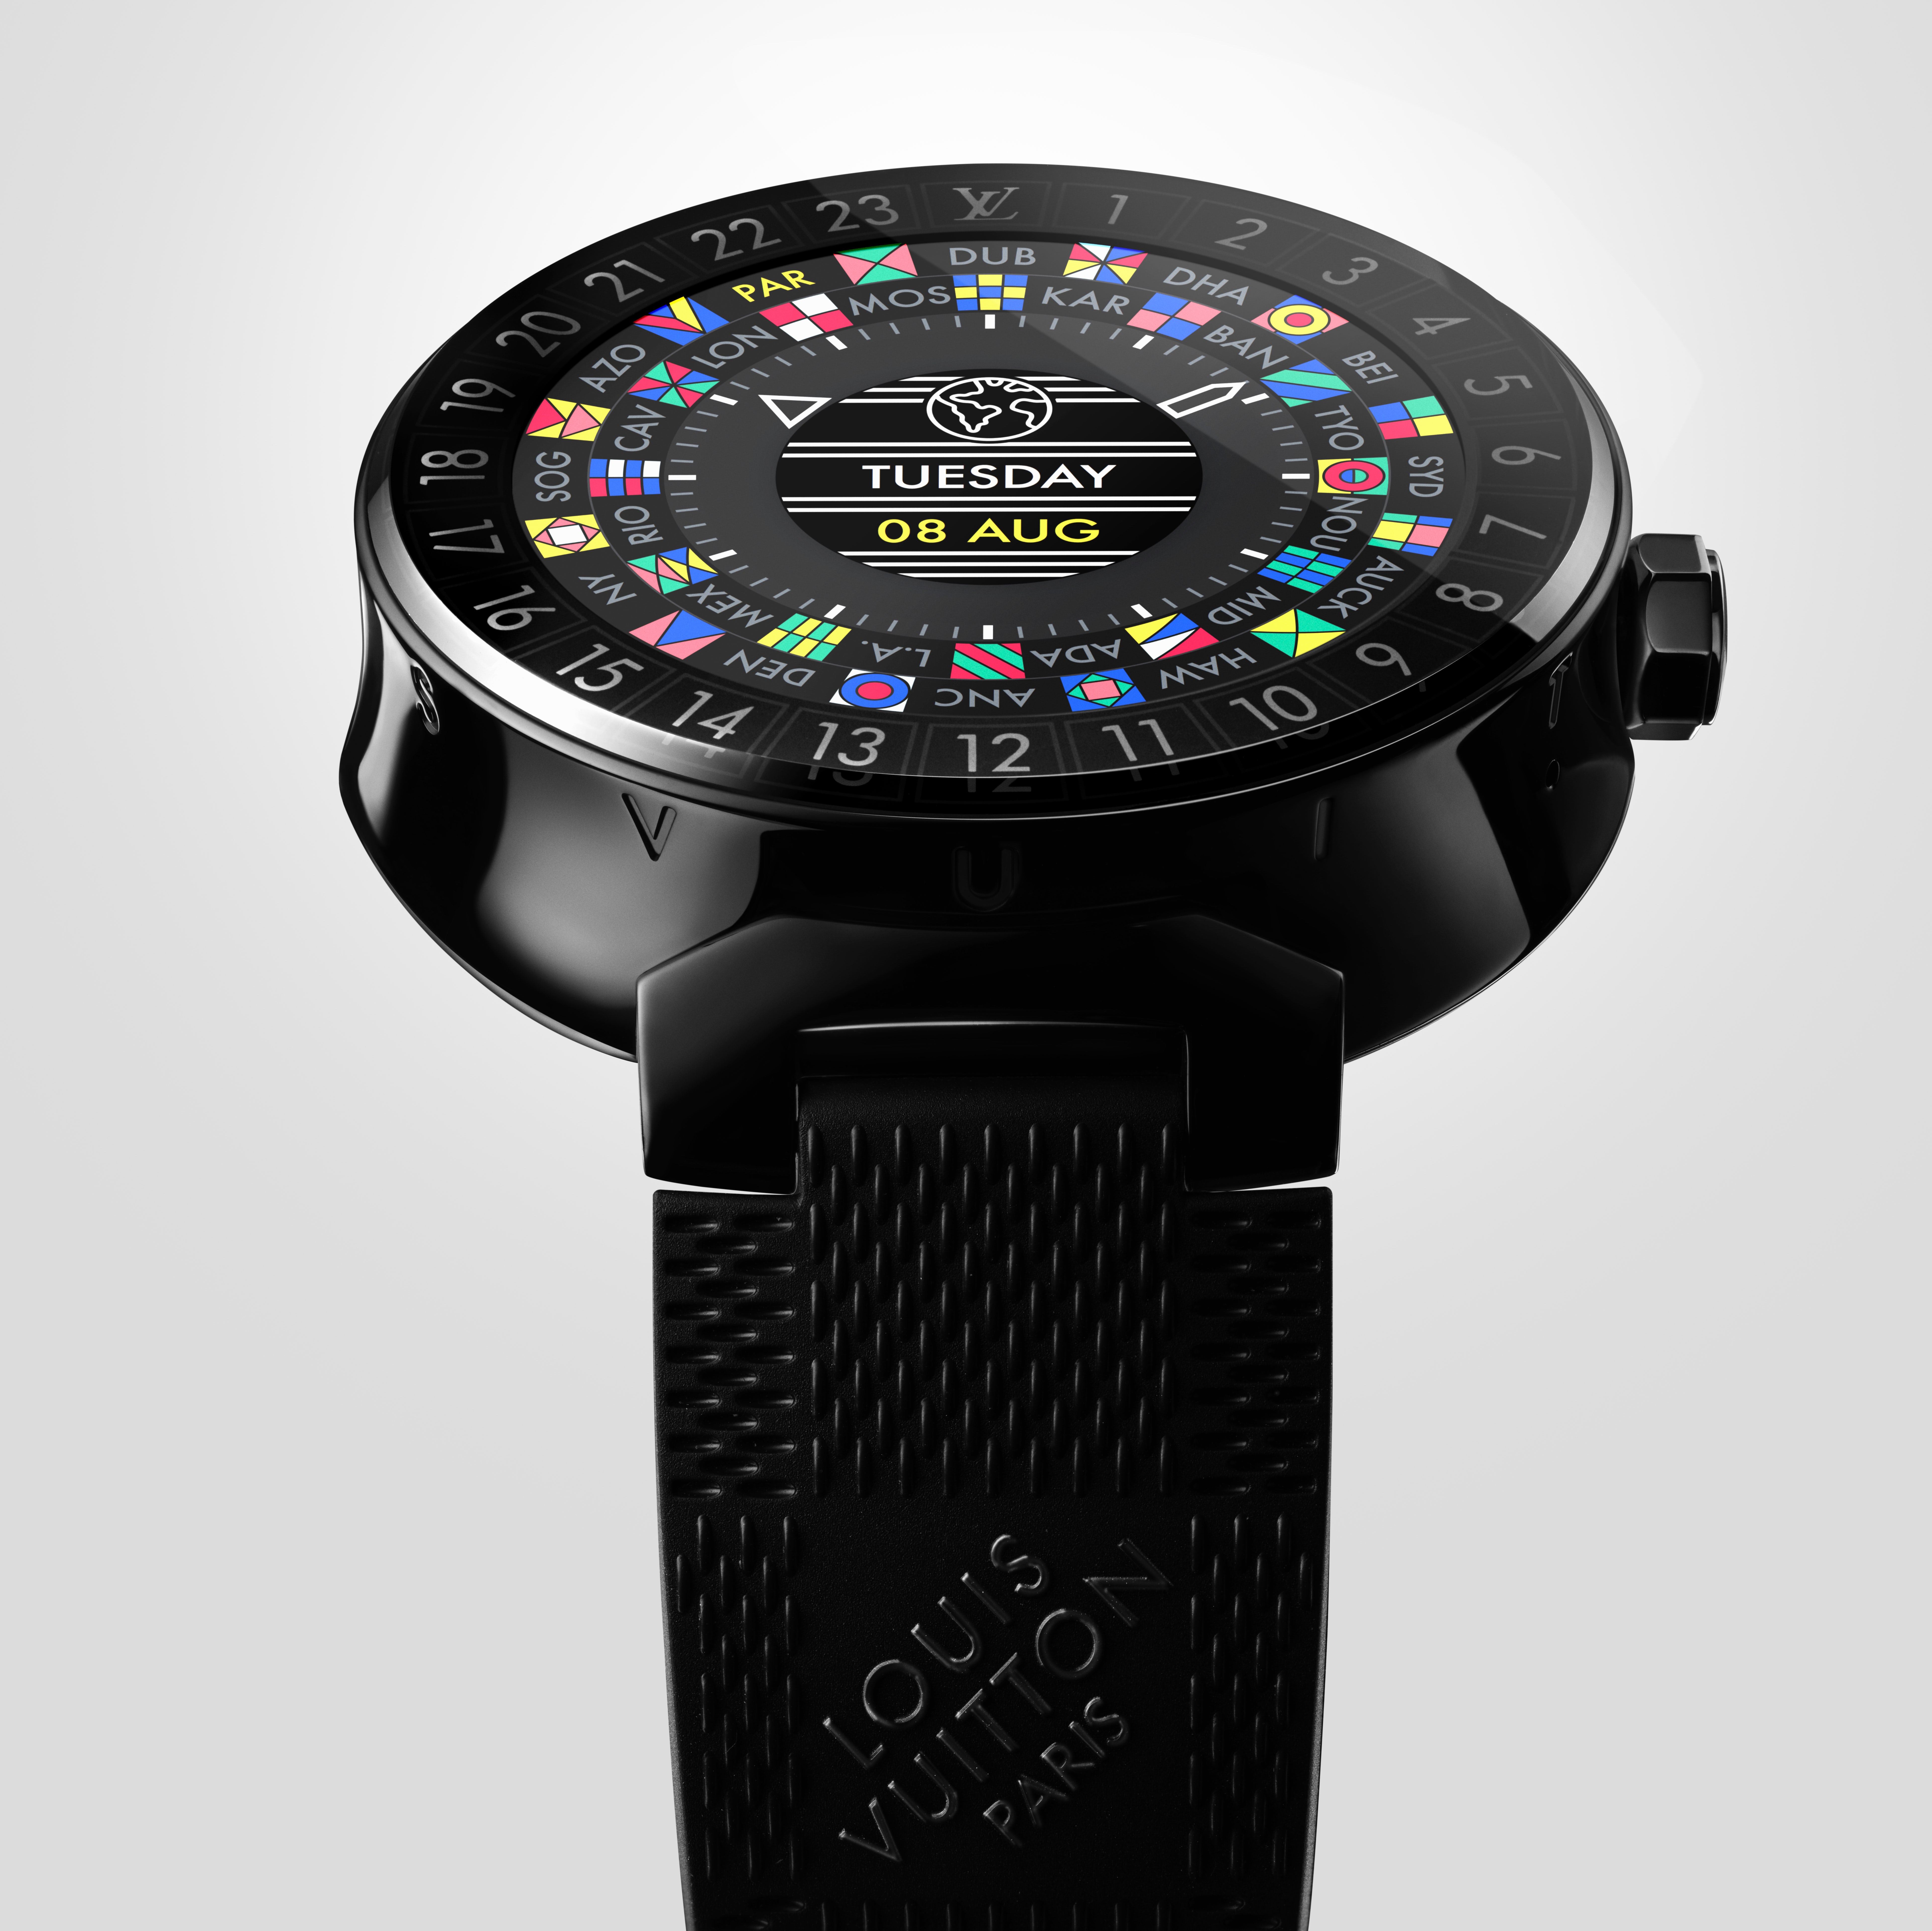 What to Know About Louis Vuitton's New Smartwatch, Tambour Horizon